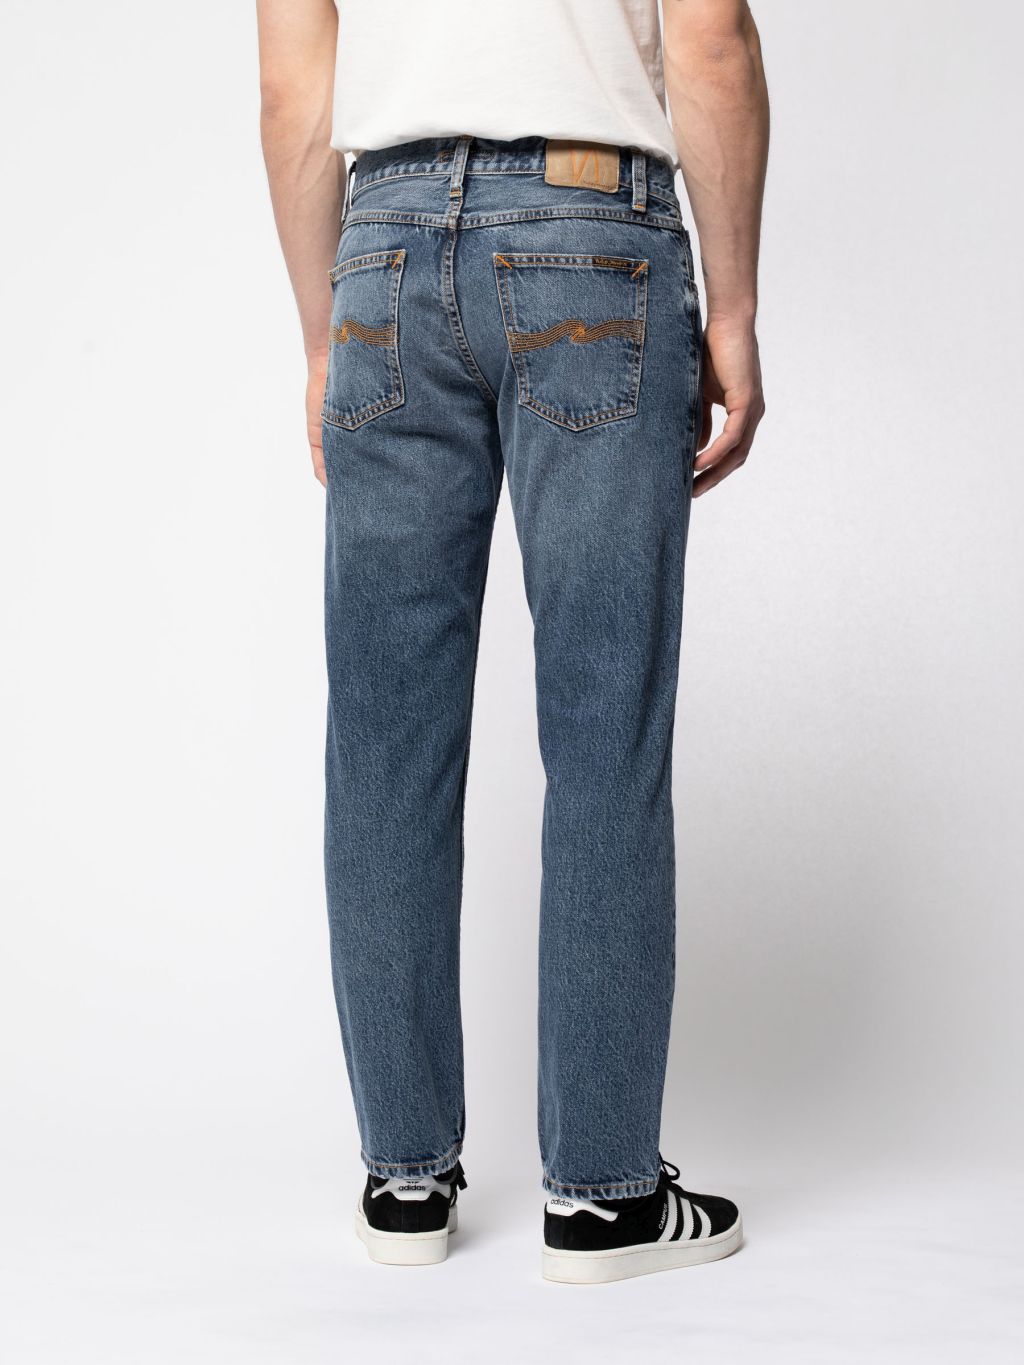 Gritty Jackson Jeans - Bio-Baumwolle-Mix Far Out 34/34